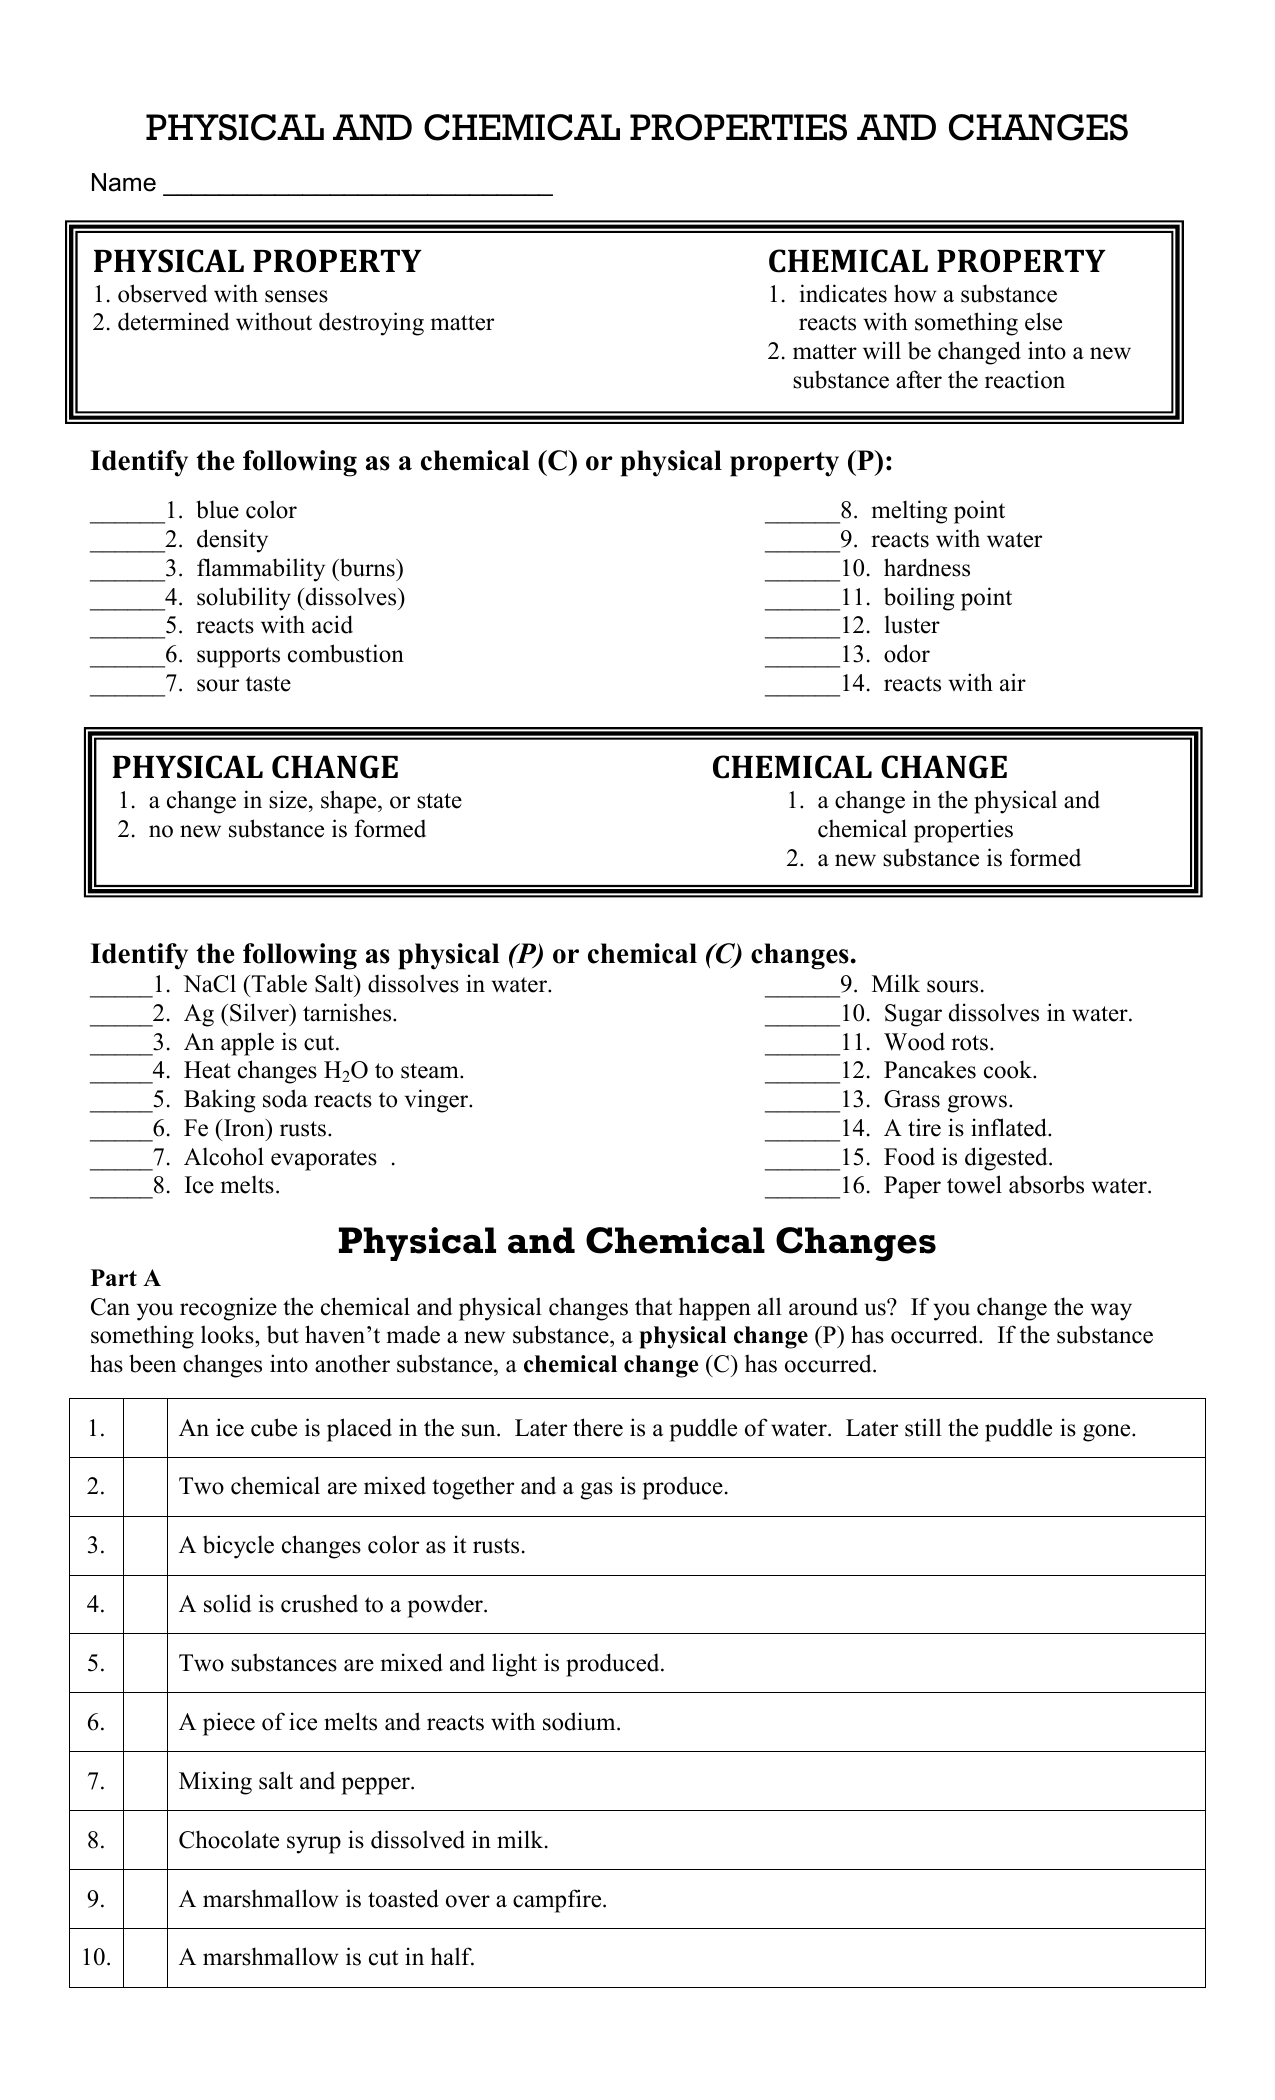 Physical and Chemical Changes Worksheet In Physical And Chemical Properties Worksheet